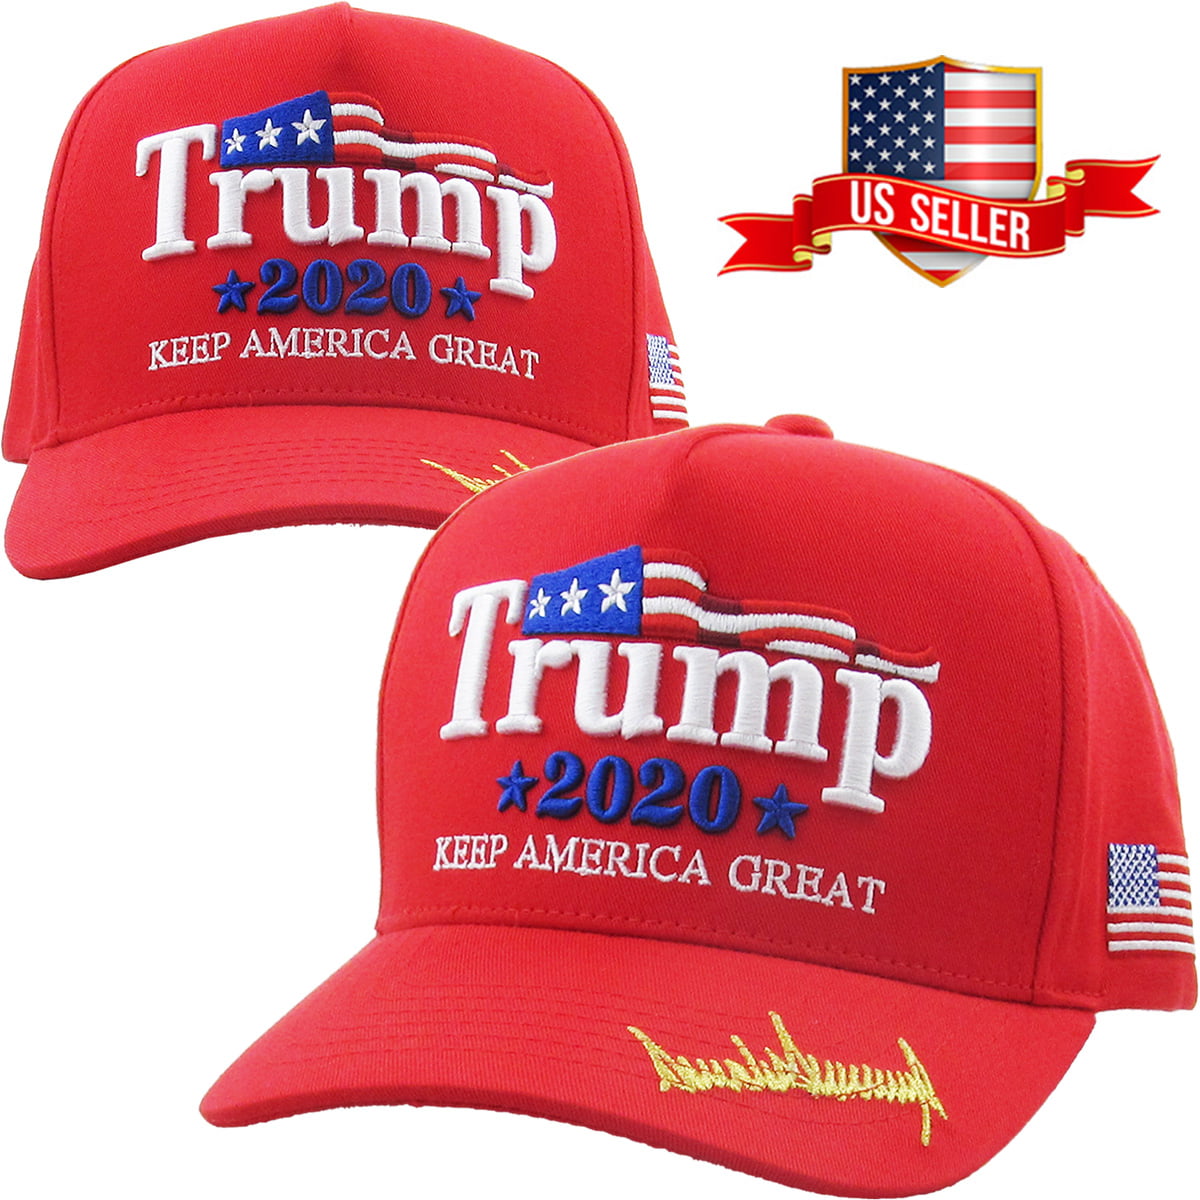 100 Pack Trump 2020 Keep America Great Cap USA President Election Unisex Red Hat 